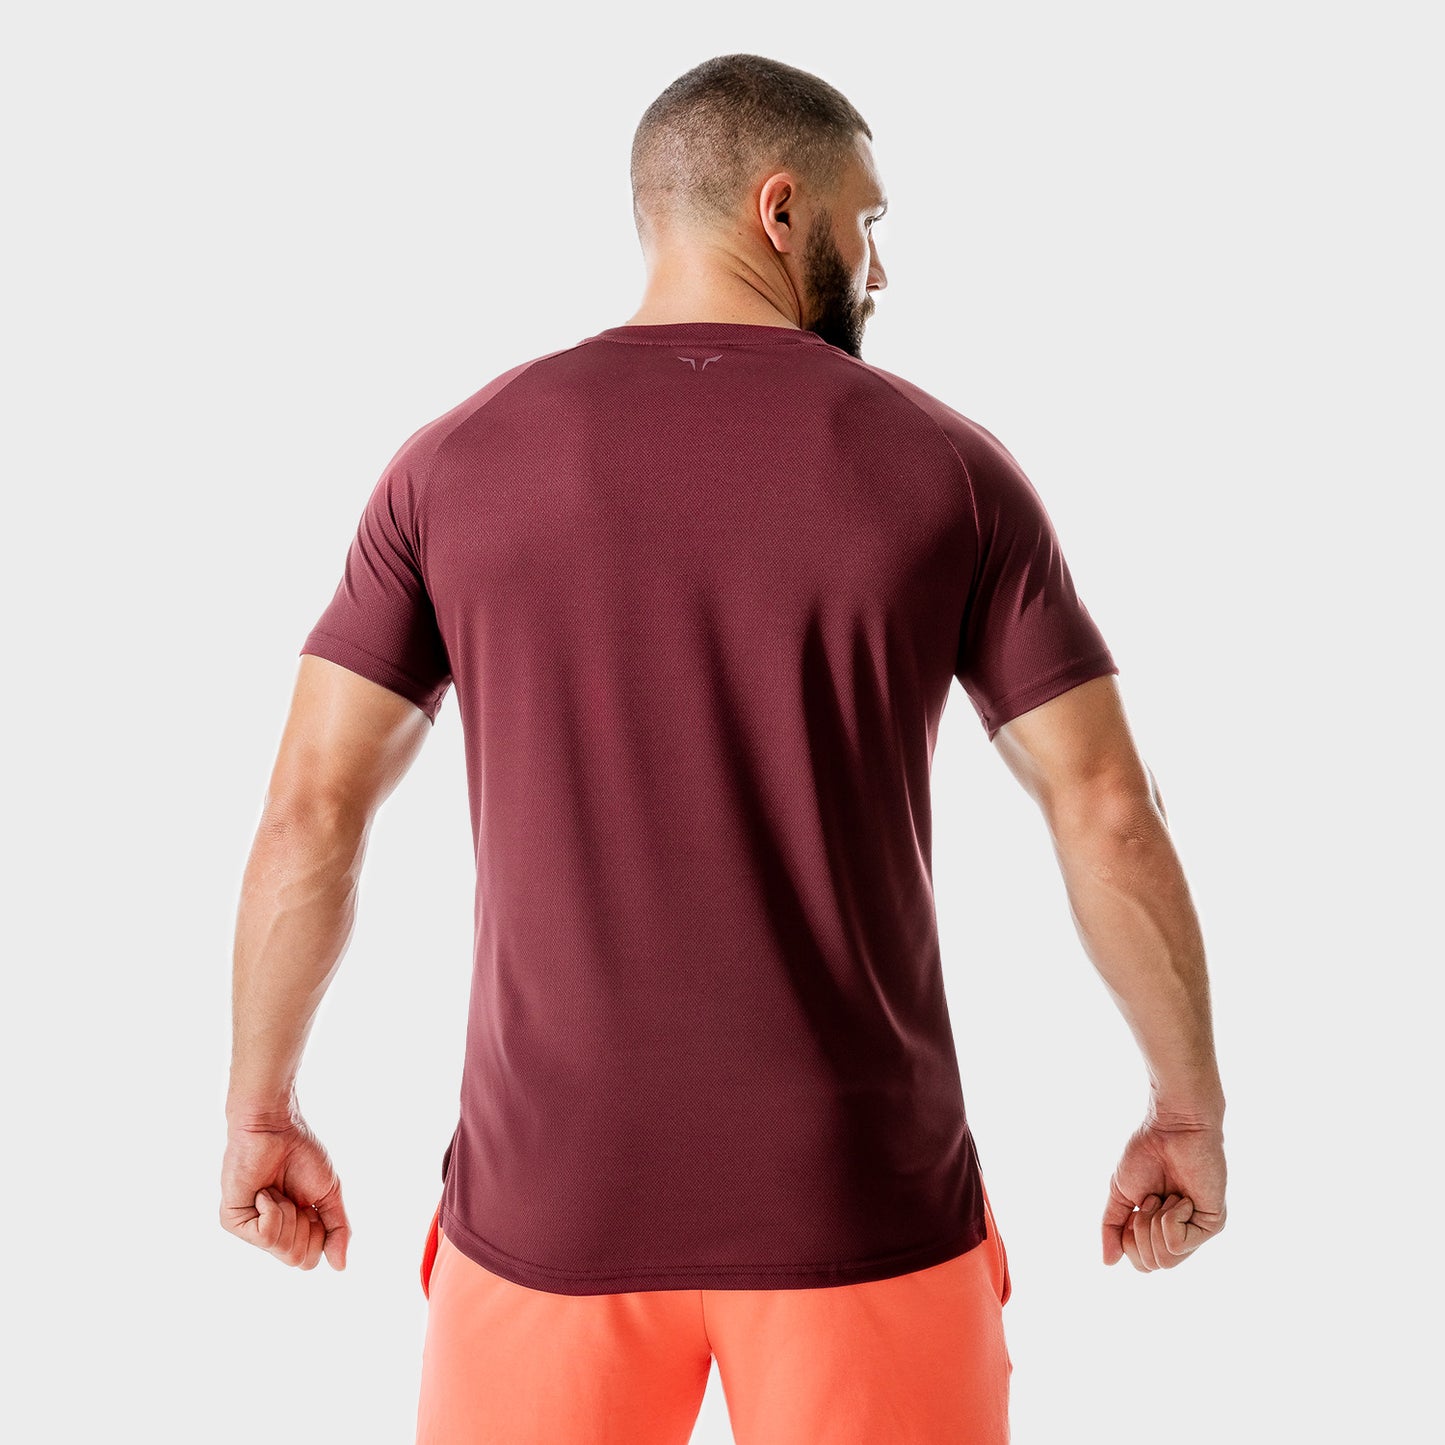 squatwolf-workout-shirts-for-men-lab-360-recycled-mesh-tee-tawny-port-gym-wear